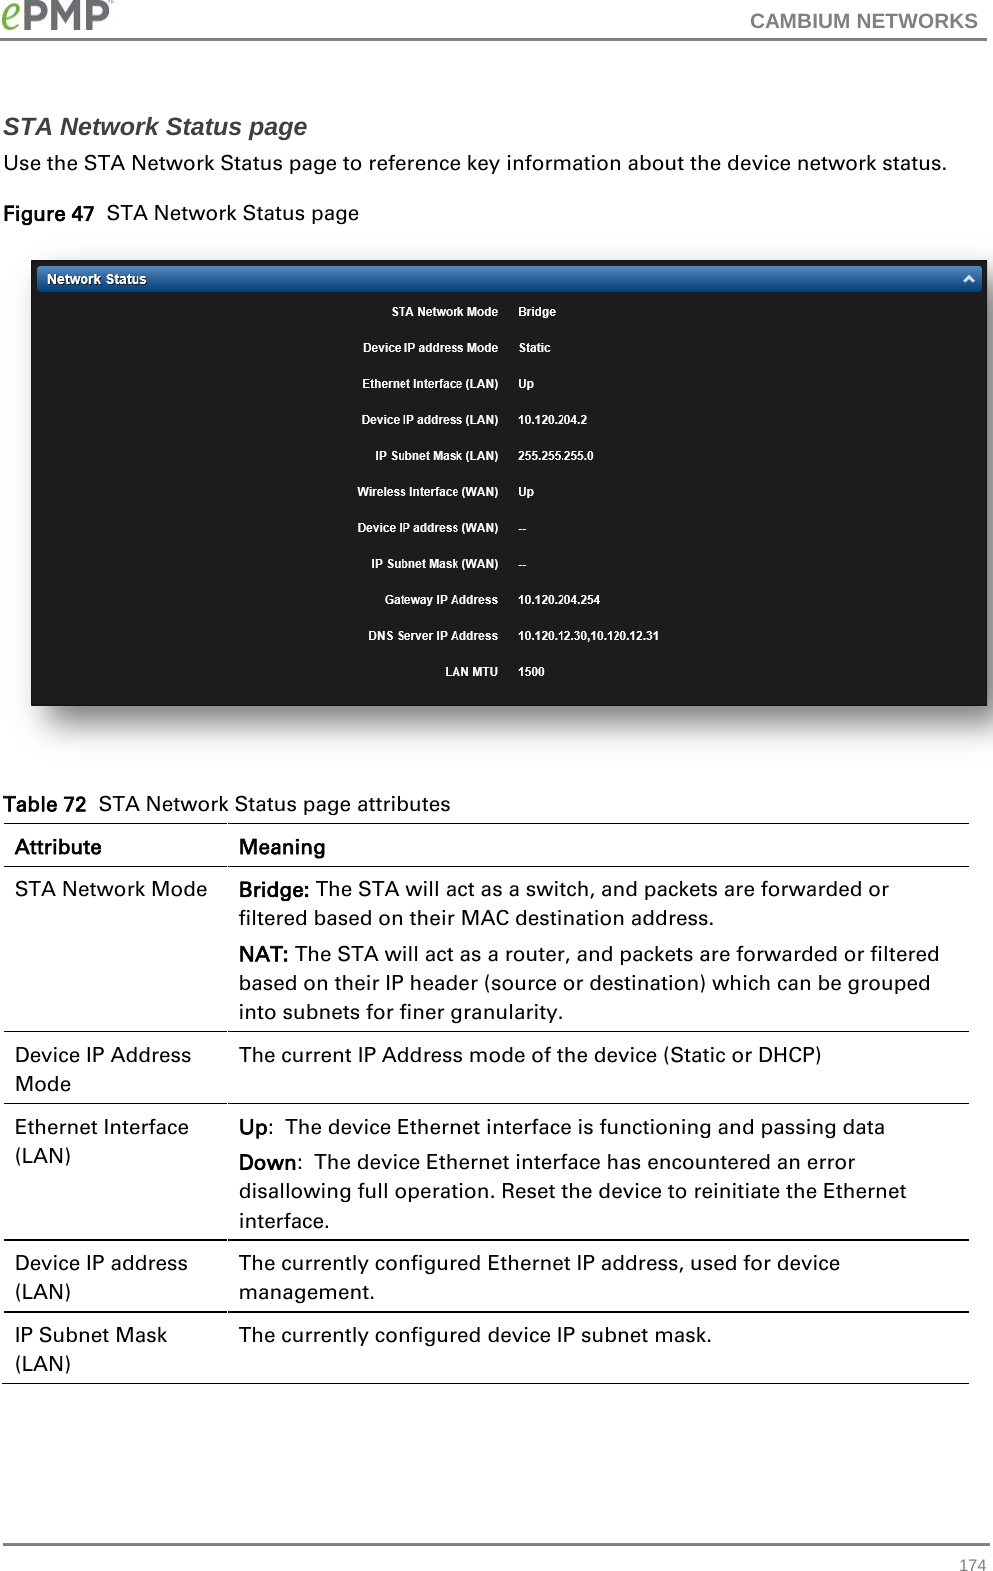 CAMBIUM NETWORKS  STA Network Status page Use the STA Network Status page to reference key information about the device network status. Figure 47  STA Network Status page  Table 72  STA Network Status page attributes Attribute Meaning STA Network Mode Bridge: The STA will act as a switch, and packets are forwarded or filtered based on their MAC destination address. NAT: The STA will act as a router, and packets are forwarded or filtered based on their IP header (source or destination) which can be grouped into subnets for finer granularity. Device IP Address Mode The current IP Address mode of the device (Static or DHCP) Ethernet Interface (LAN) Up:  The device Ethernet interface is functioning and passing data Down:  The device Ethernet interface has encountered an error disallowing full operation. Reset the device to reinitiate the Ethernet interface. Device IP address (LAN) The currently configured Ethernet IP address, used for device management. IP Subnet Mask (LAN) The currently configured device IP subnet mask.  174 